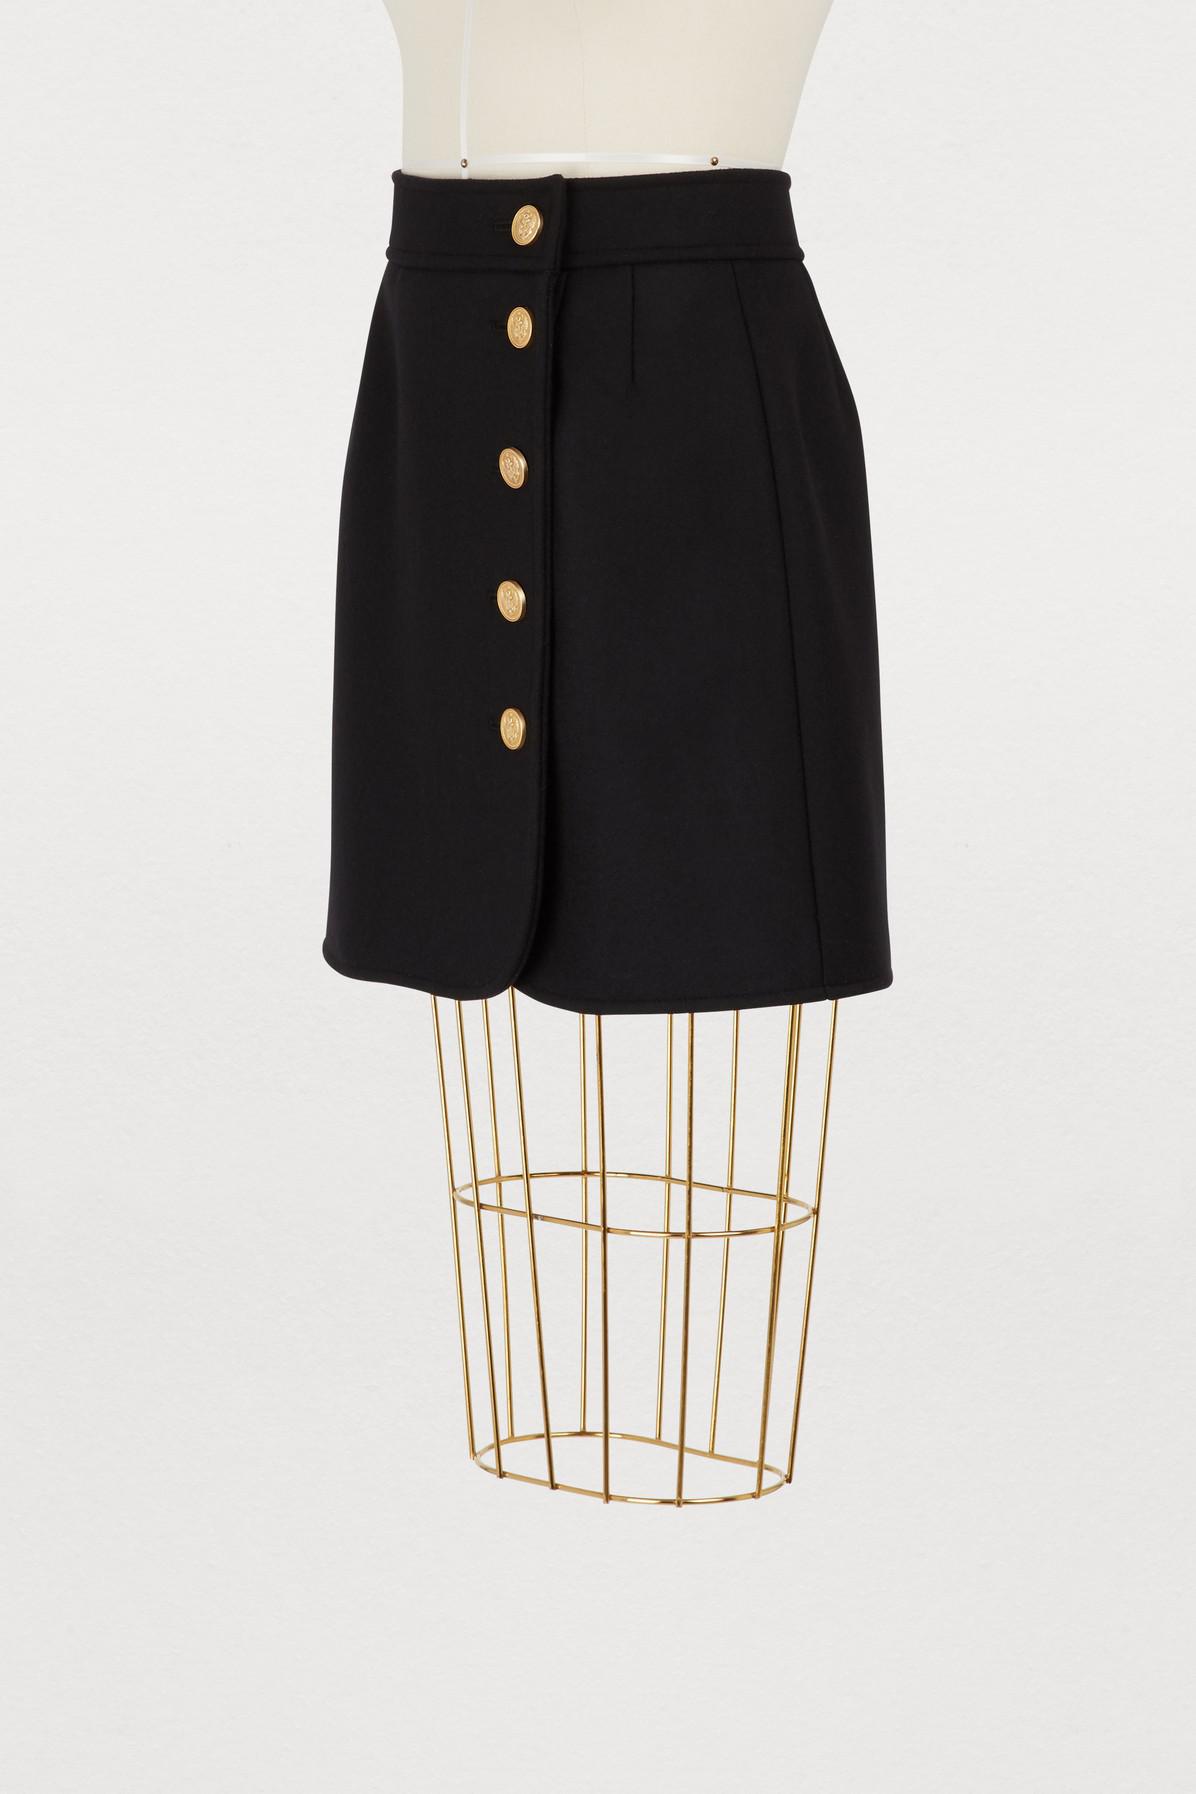 RED Valentino Wool Skirt With Gold Buttons in Nero (Black) - Lyst